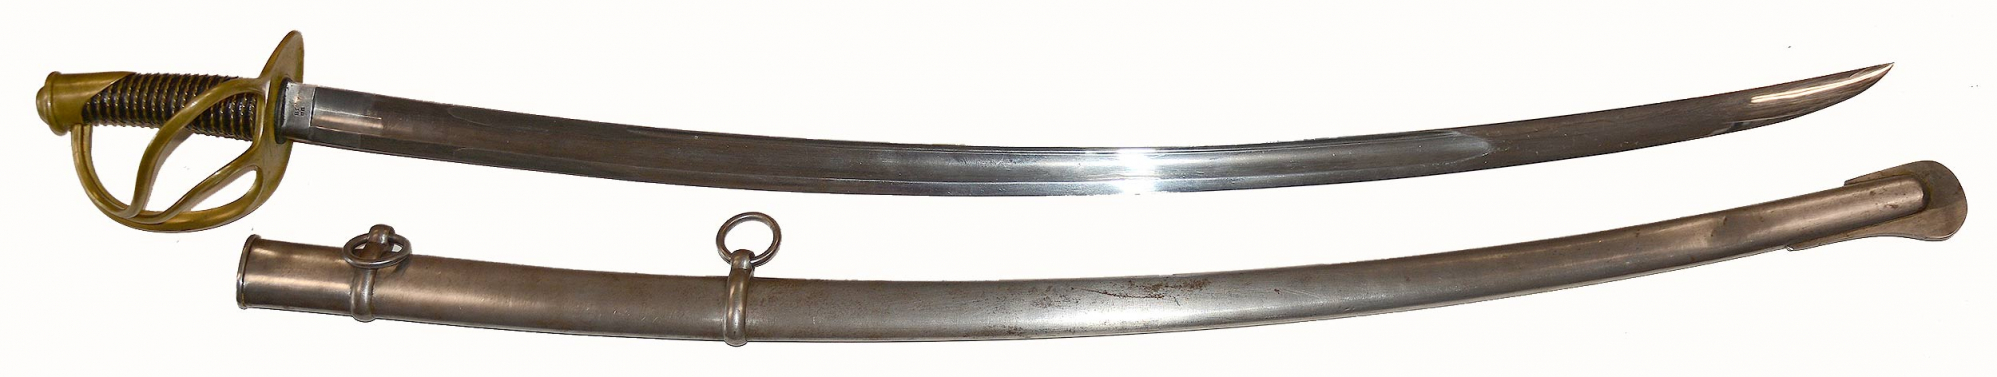 SUPER NICE AMES MODEL 1840 CAVALRY SABER DATED 1846 – POSSIBLE MEXICAN WAR USE